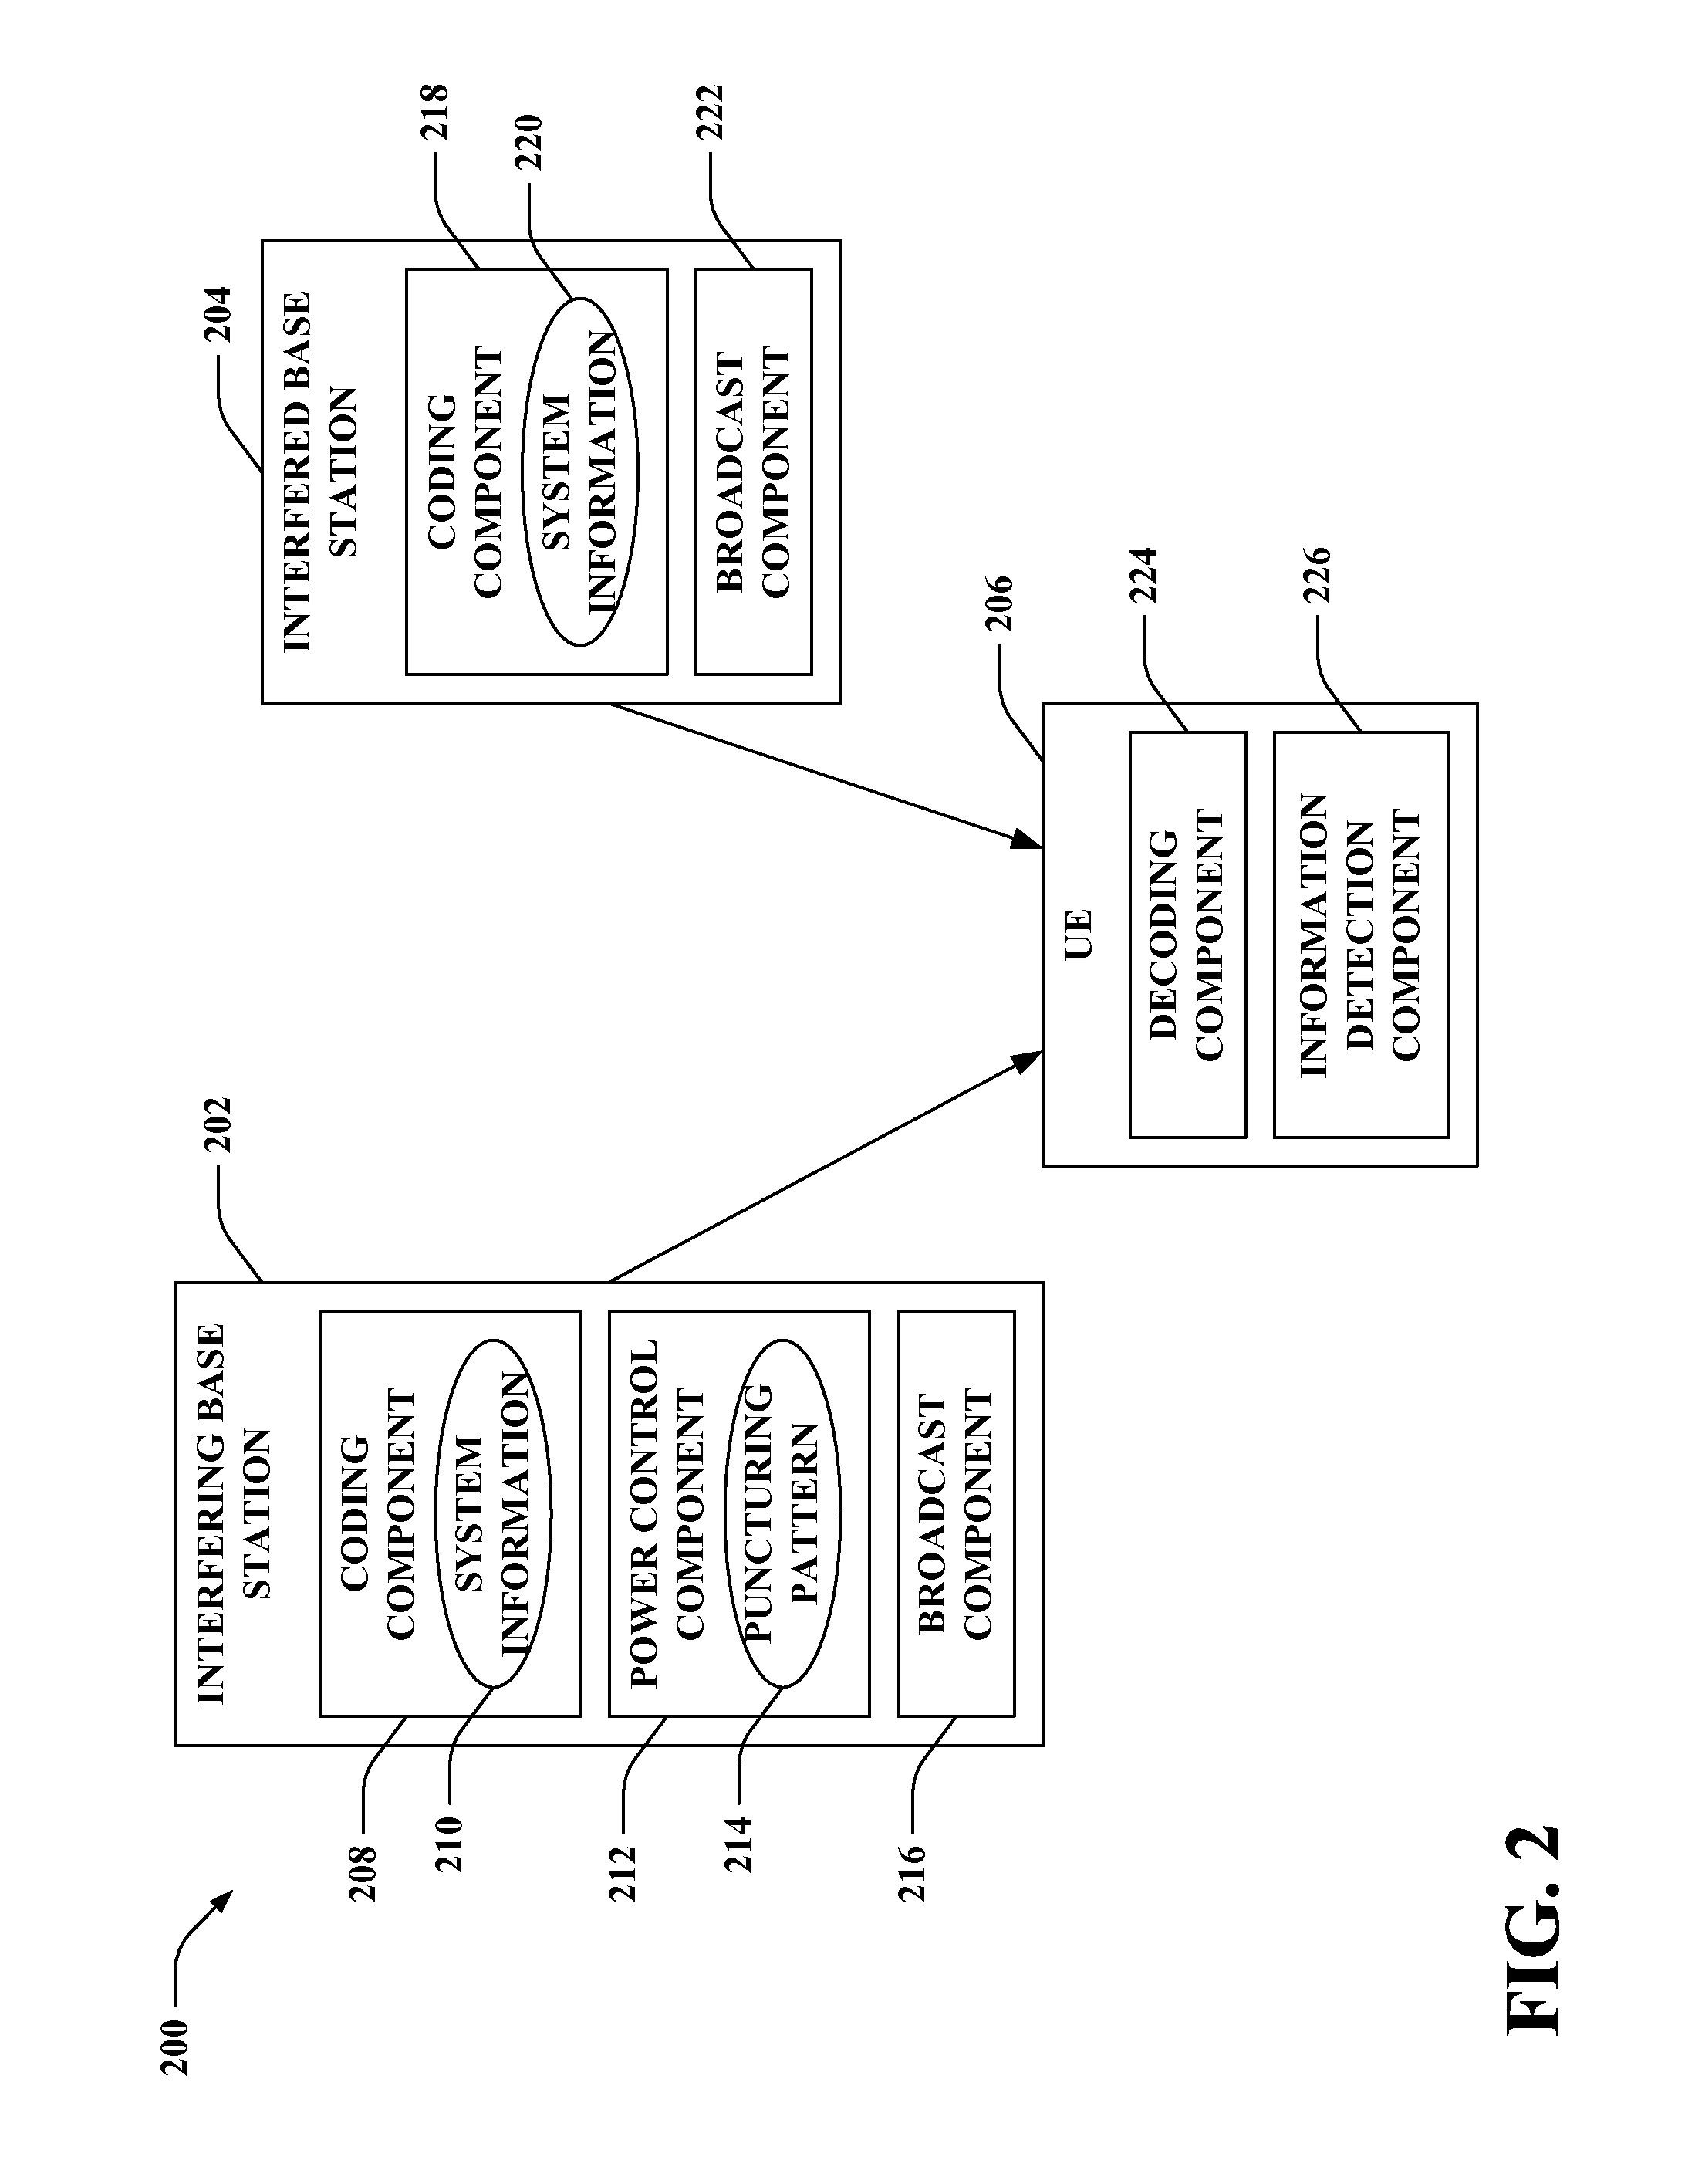 Interference mitigation by puncturing transmission of interfering cells